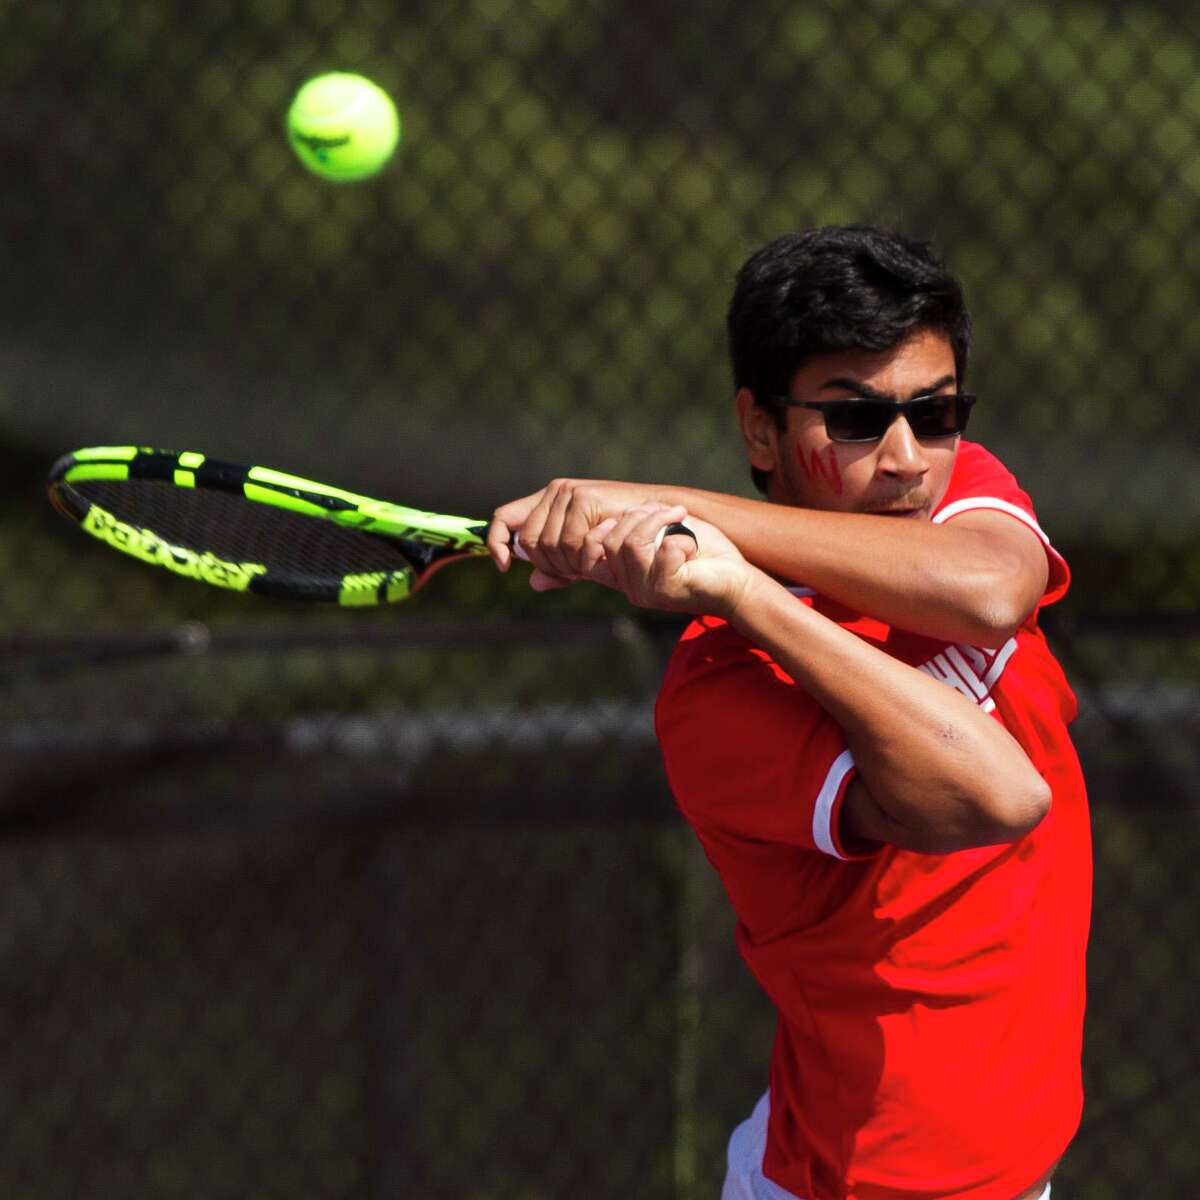 Rock Kanzarkar of The Woodlands returns a serve in the boys doubles finals during the District 12-6A tennis tournament at The Woodlands High School, Thursday, April 5, 2018, in The Woodlands.